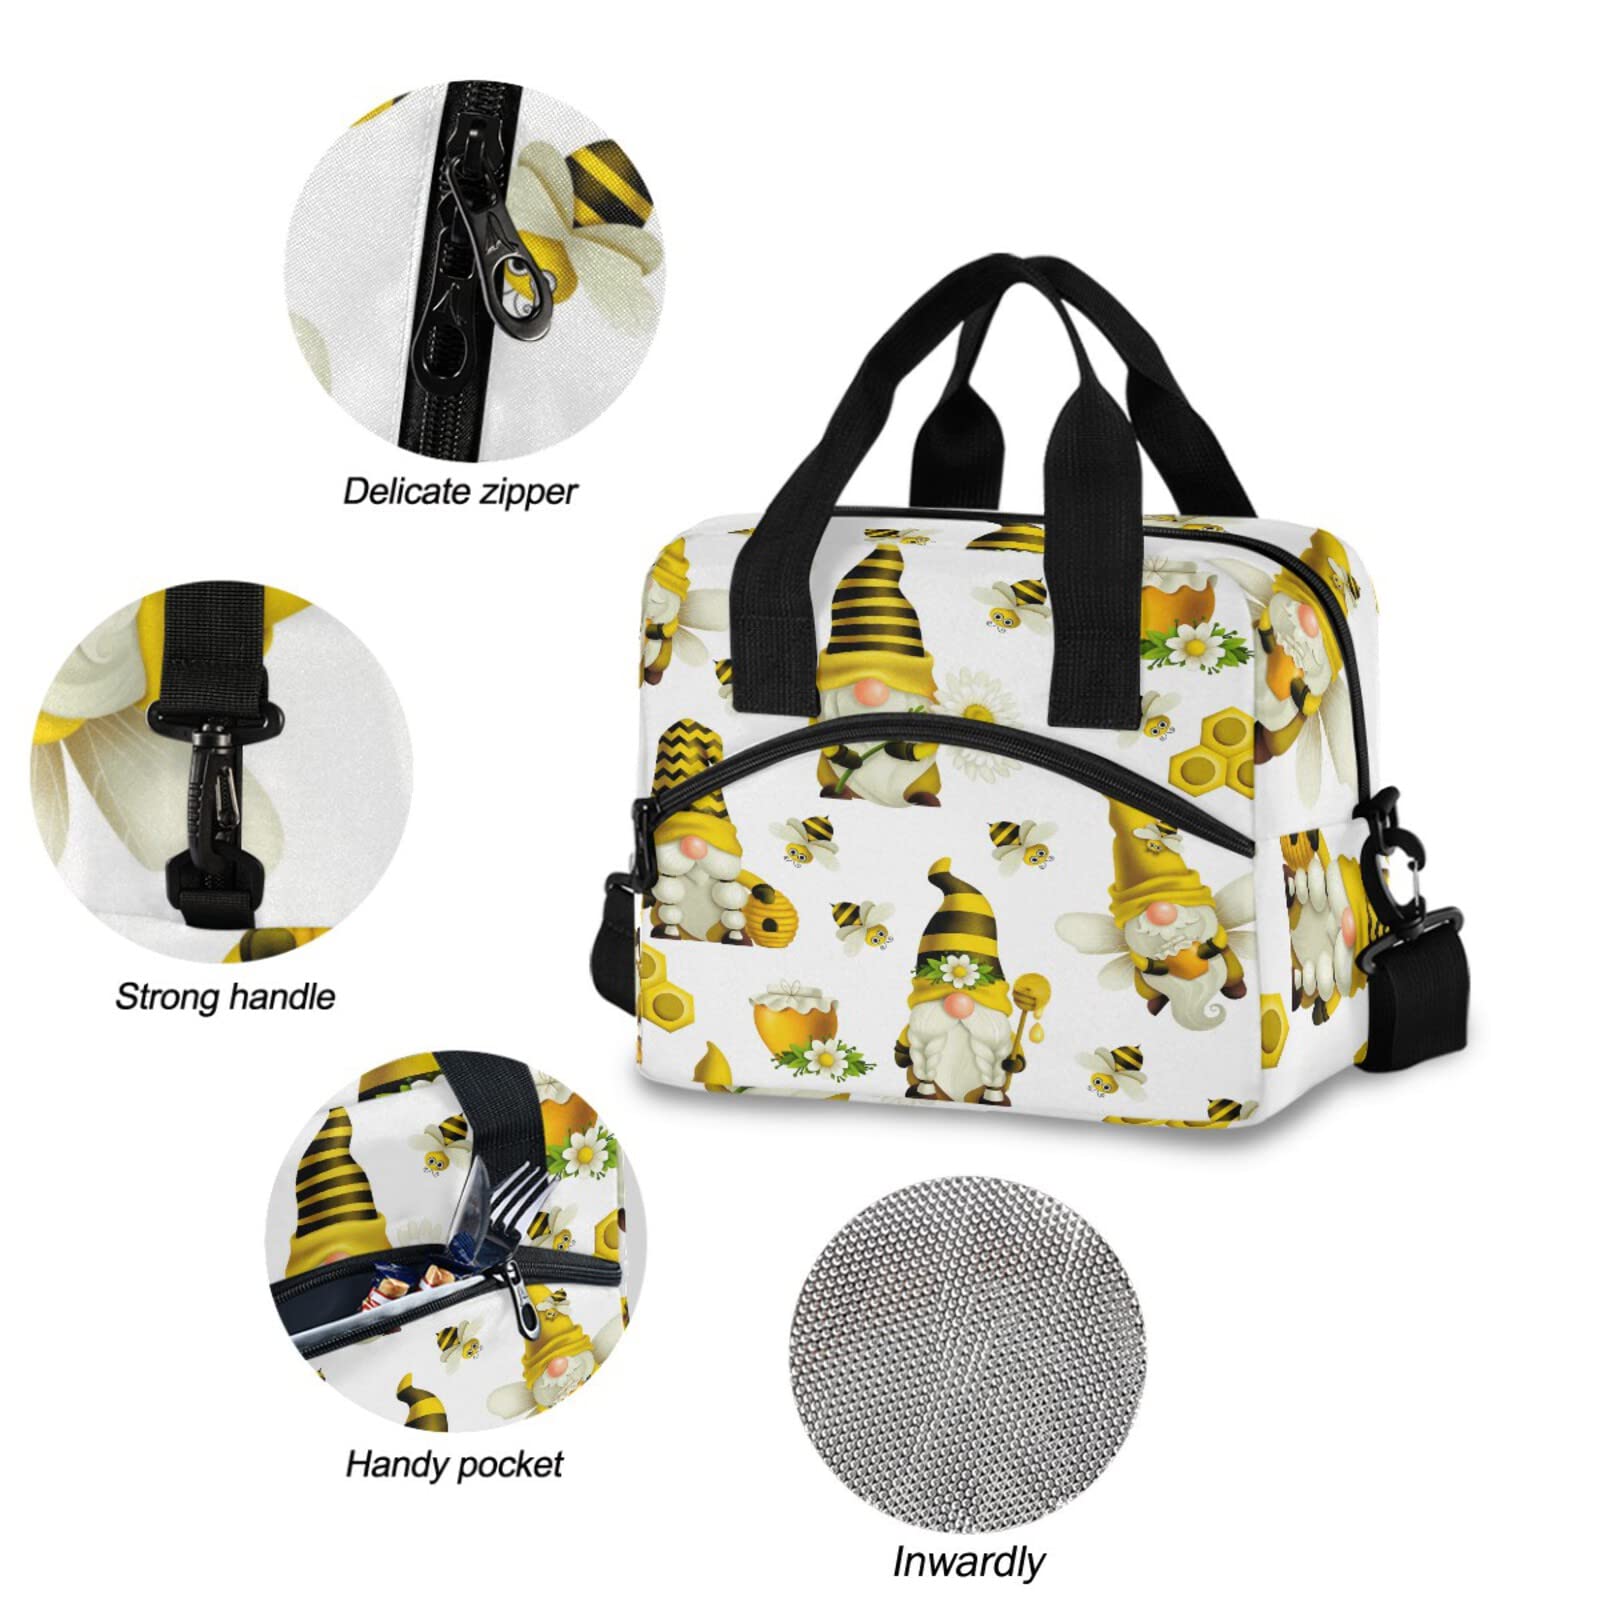 Oarencol Gnome Bees Honey Insulated Lunch Tote Bag Reusable Cooler Lunch Box with Shoulder Strap for Work Picnic School Beach